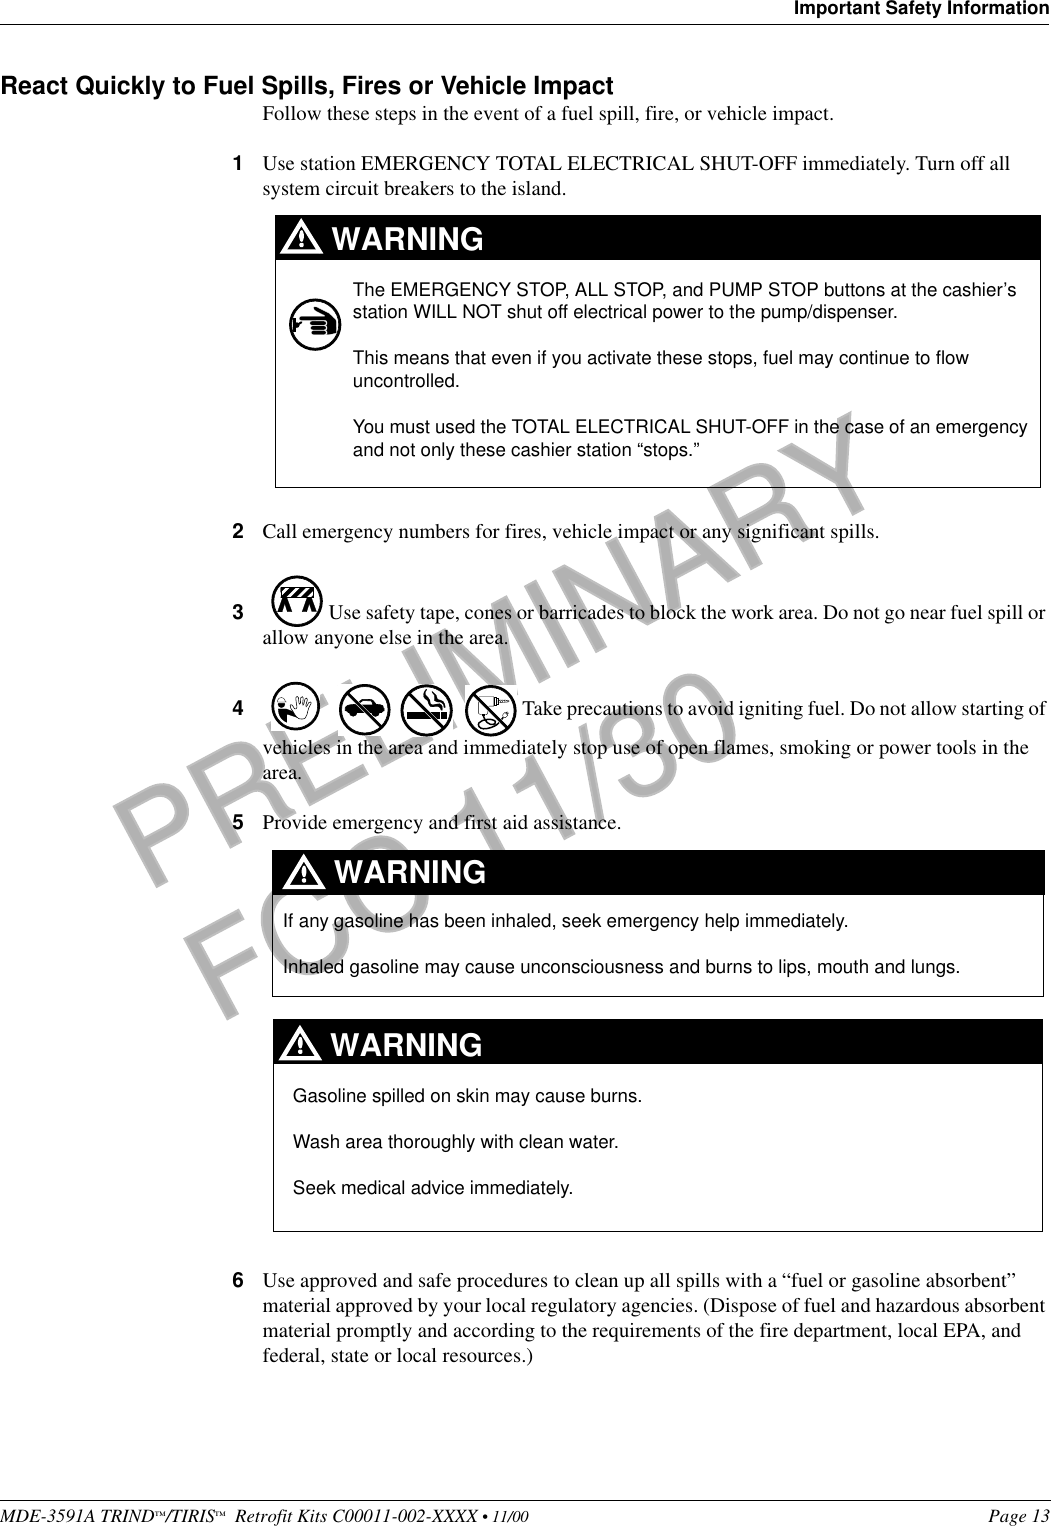 MDE-3591A TRIND™/TIRIS™  Retrofit Kits C00011-002-XXXX • 11/00 Page 13Important Safety InformationPRELIMINARYFCC 11/30React Quickly to Fuel Spills, Fires or Vehicle ImpactFollow these steps in the event of a fuel spill, fire, or vehicle impact.1Use station EMERGENCY TOTAL ELECTRICAL SHUT-OFF immediately. Turn off all system circuit breakers to the island.2Call emergency numbers for fires, vehicle impact or any significant spills. 3 Use safety tape, cones or barricades to block the work area. Do not go near fuel spill or allow anyone else in the area. 4 Take precautions to avoid igniting fuel. Do not allow starting of vehicles in the area and immediately stop use of open flames, smoking or power tools in the area.5Provide emergency and first aid assistance. 6Use approved and safe procedures to clean up all spills with a “fuel or gasoline absorbent” material approved by your local regulatory agencies. (Dispose of fuel and hazardous absorbent material promptly and according to the requirements of the fire department, local EPA, and federal, state or local resources.)The EMERGENCY STOP, ALL STOP, and PUMP STOP buttons at the cashier’s station WILL NOT shut off electrical power to the pump/dispenser. This means that even if you activate these stops, fuel may continue to flow uncontrolled. You must used the TOTAL ELECTRICAL SHUT-OFF in the case of an emergency and not only these cashier station “stops.”WARNINGIf any gasoline has been inhaled, seek emergency help immediately. Inhaled gasoline may cause unconsciousness and burns to lips, mouth and lungs.WARNINGGasoline spilled on skin may cause burns.Wash area thoroughly with clean water. Seek medical advice immediately.WARNING